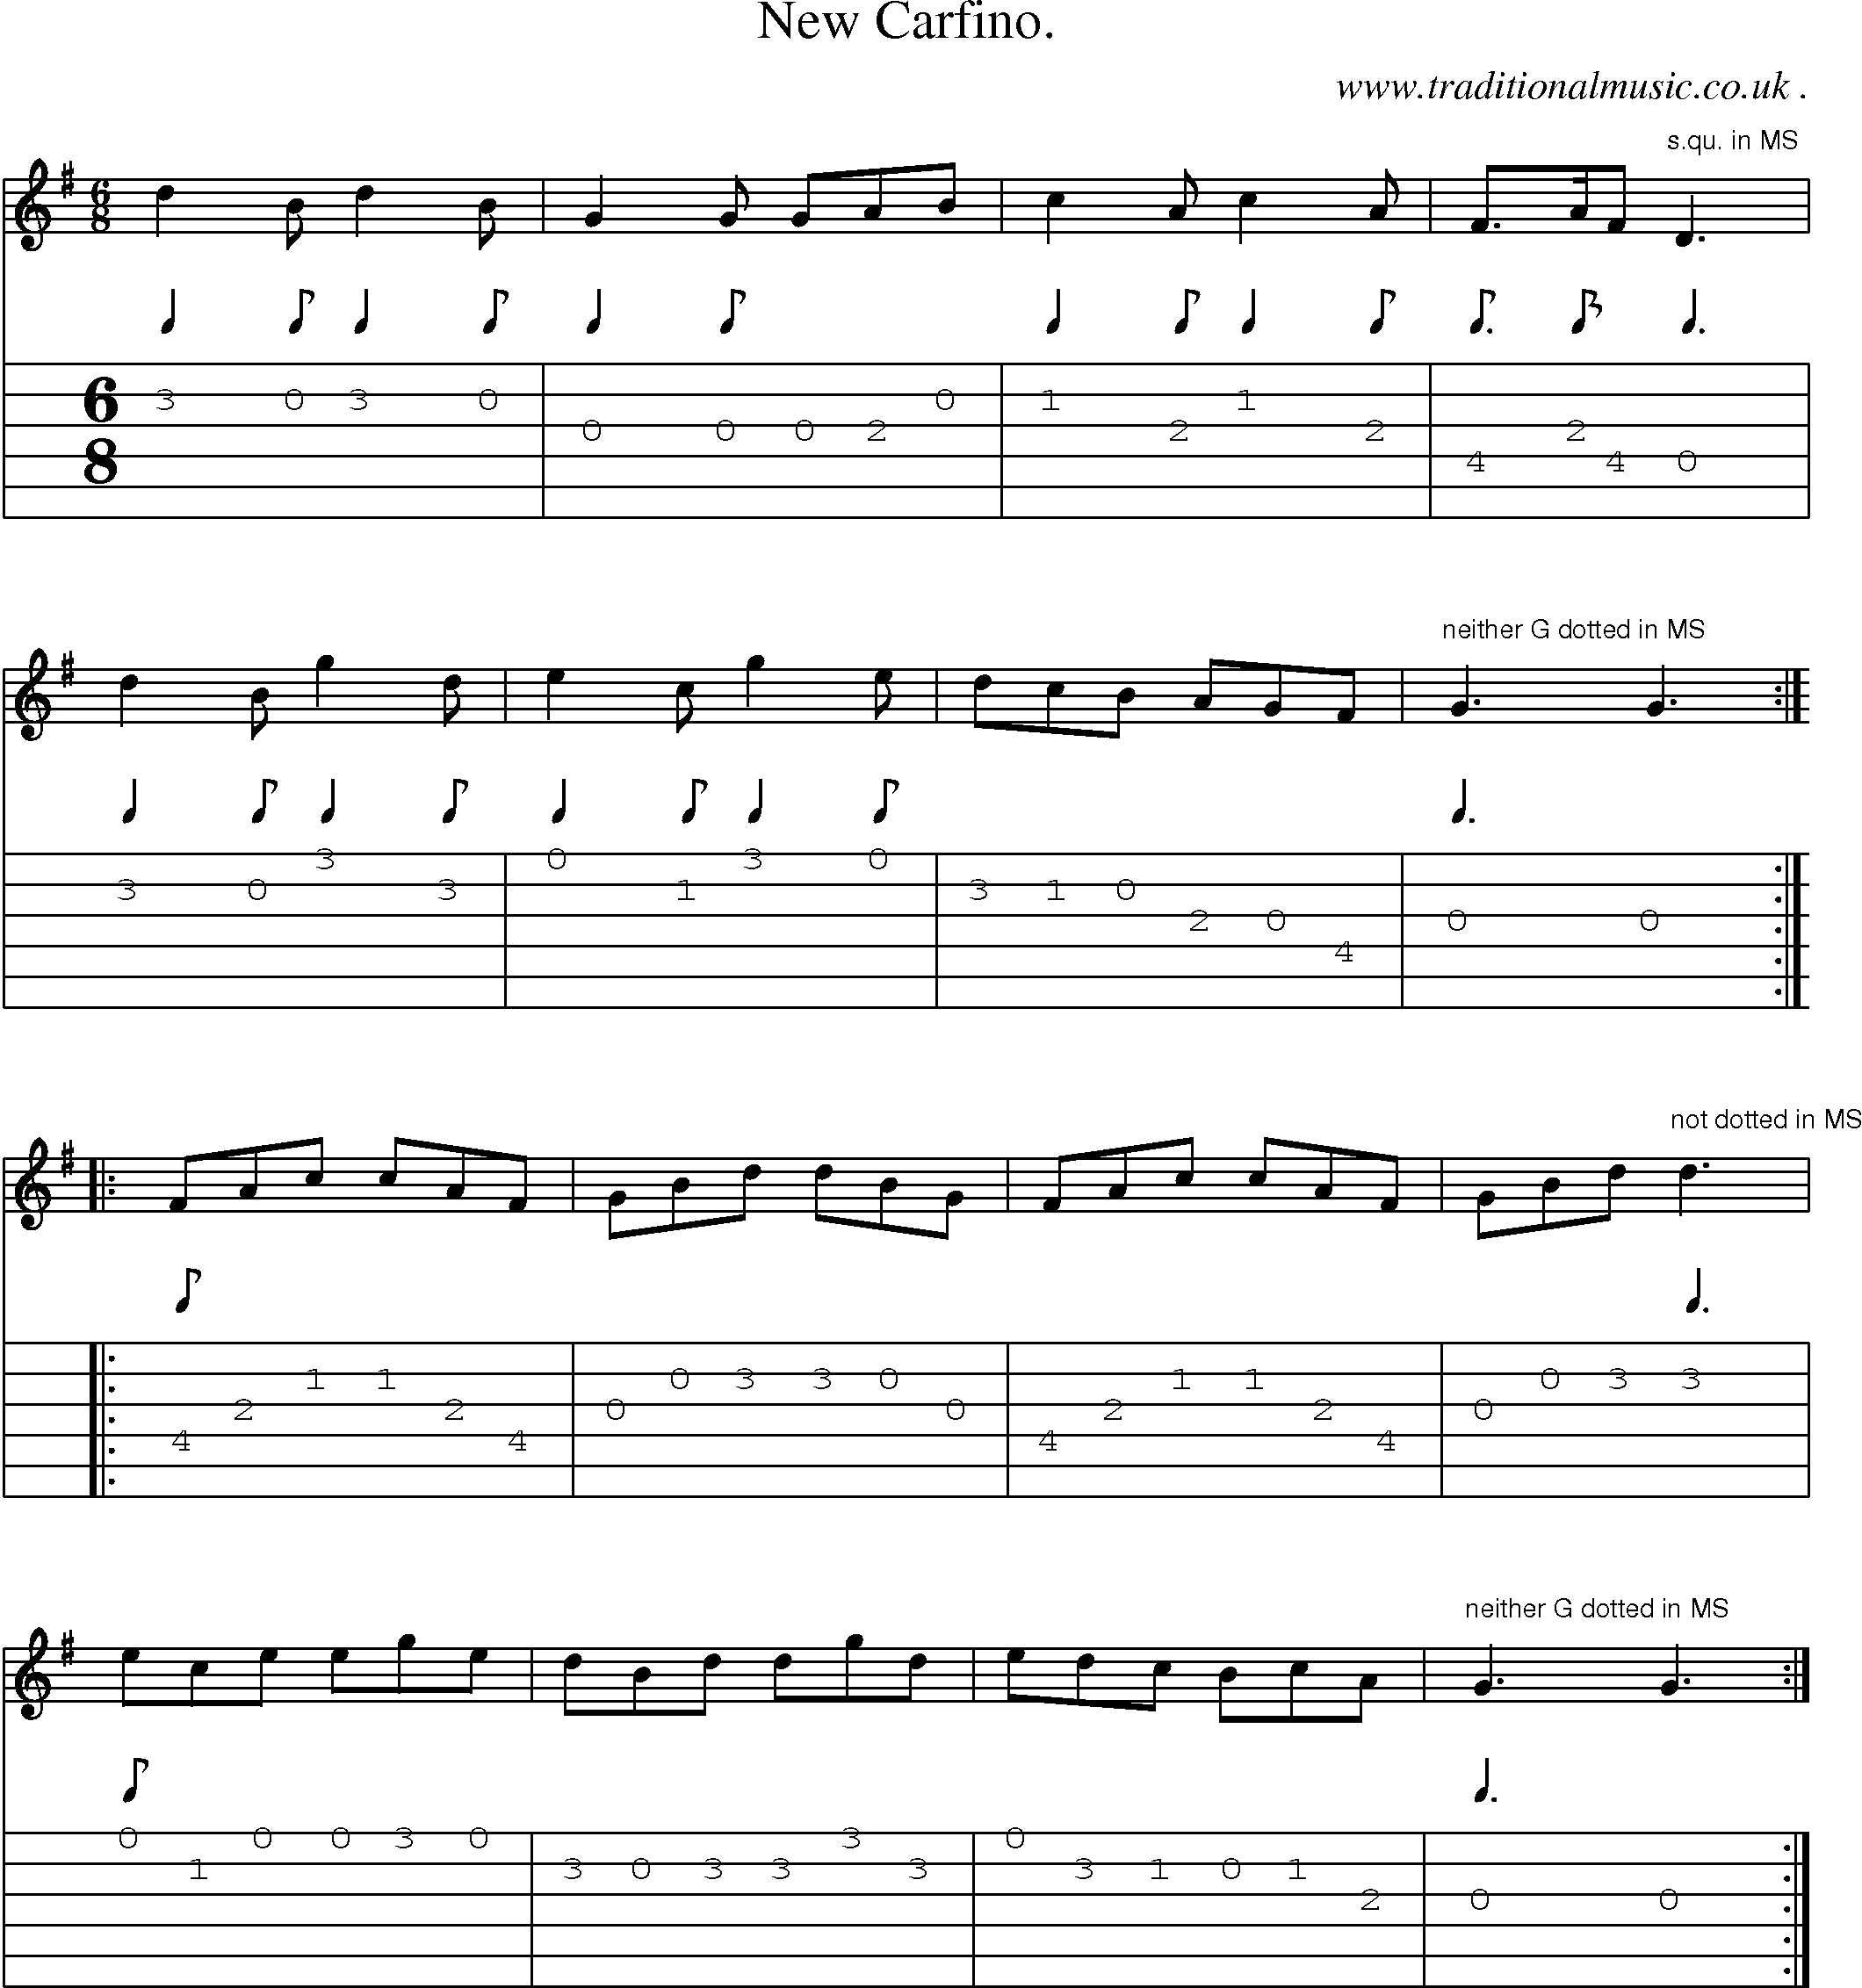 Sheet-Music and Guitar Tabs for New Carfino